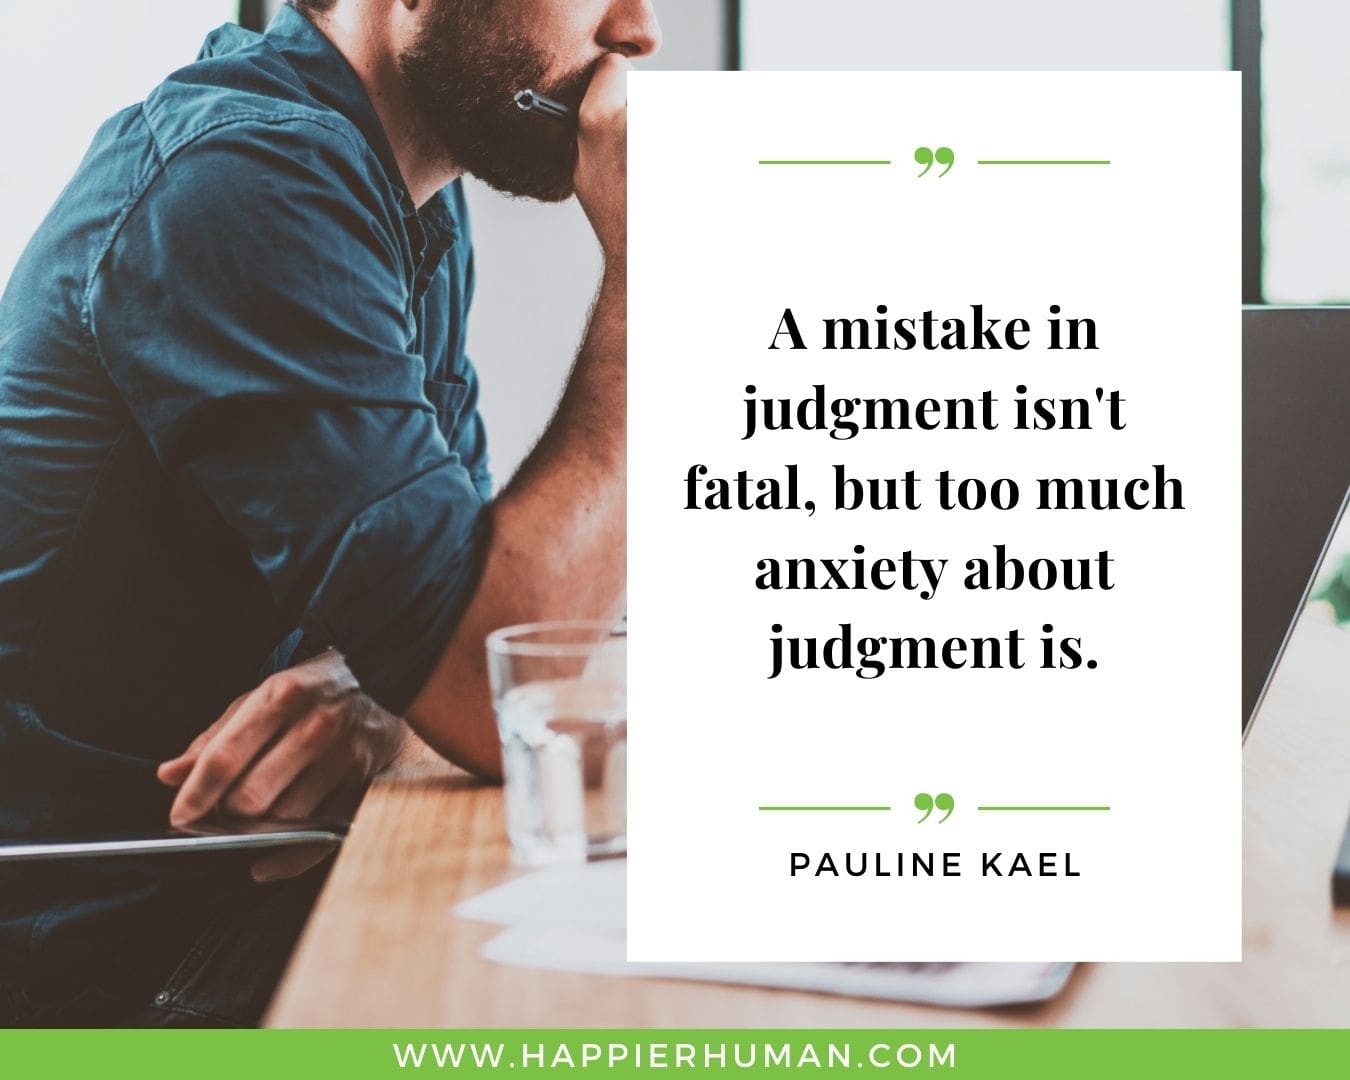 Overthinking Quotes - "A mistake in judgment isn't fatal, but too much anxiety about judgment is." - Pauline Kael